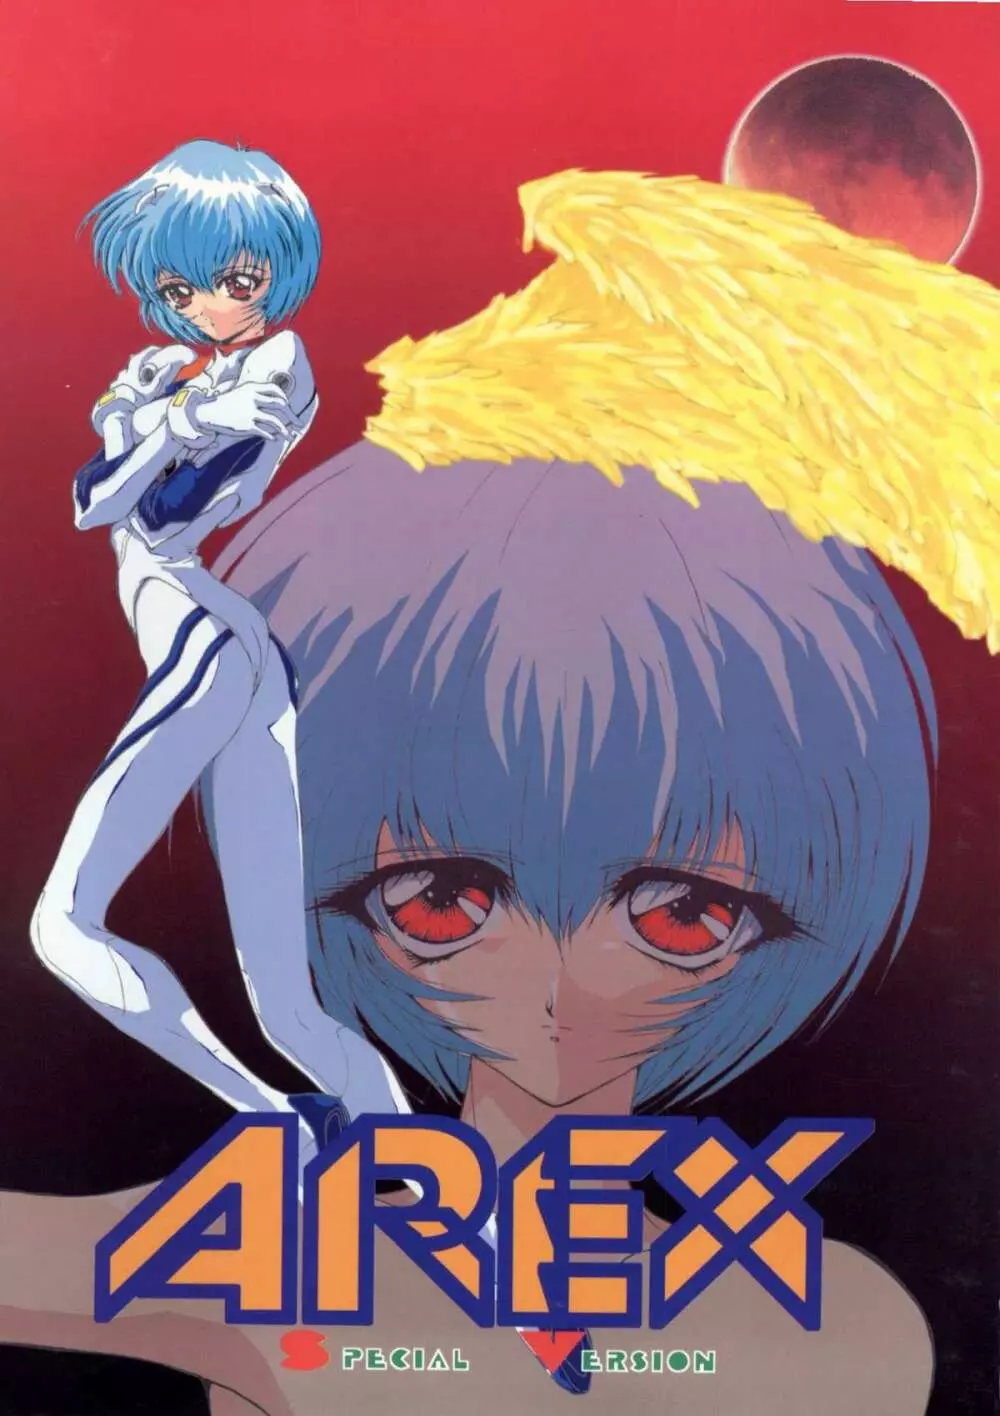 AREX SPECIAL VERSION 1ページ